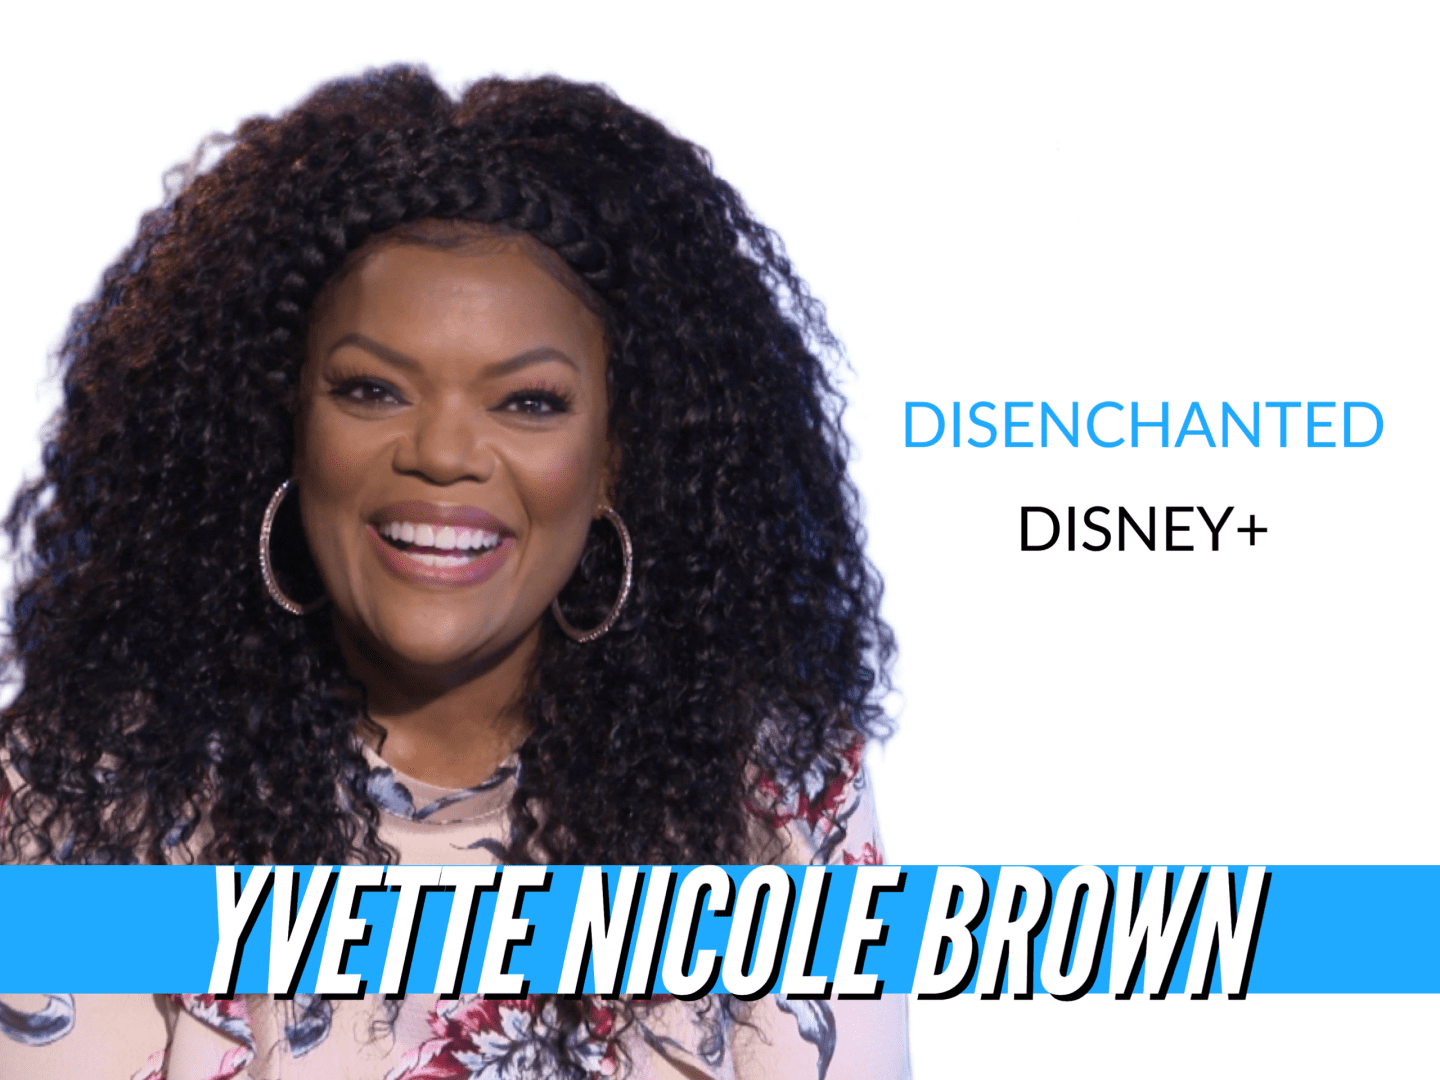 Yvette Nicole Brown says her mother's love helped her finish 'Disenchanted'